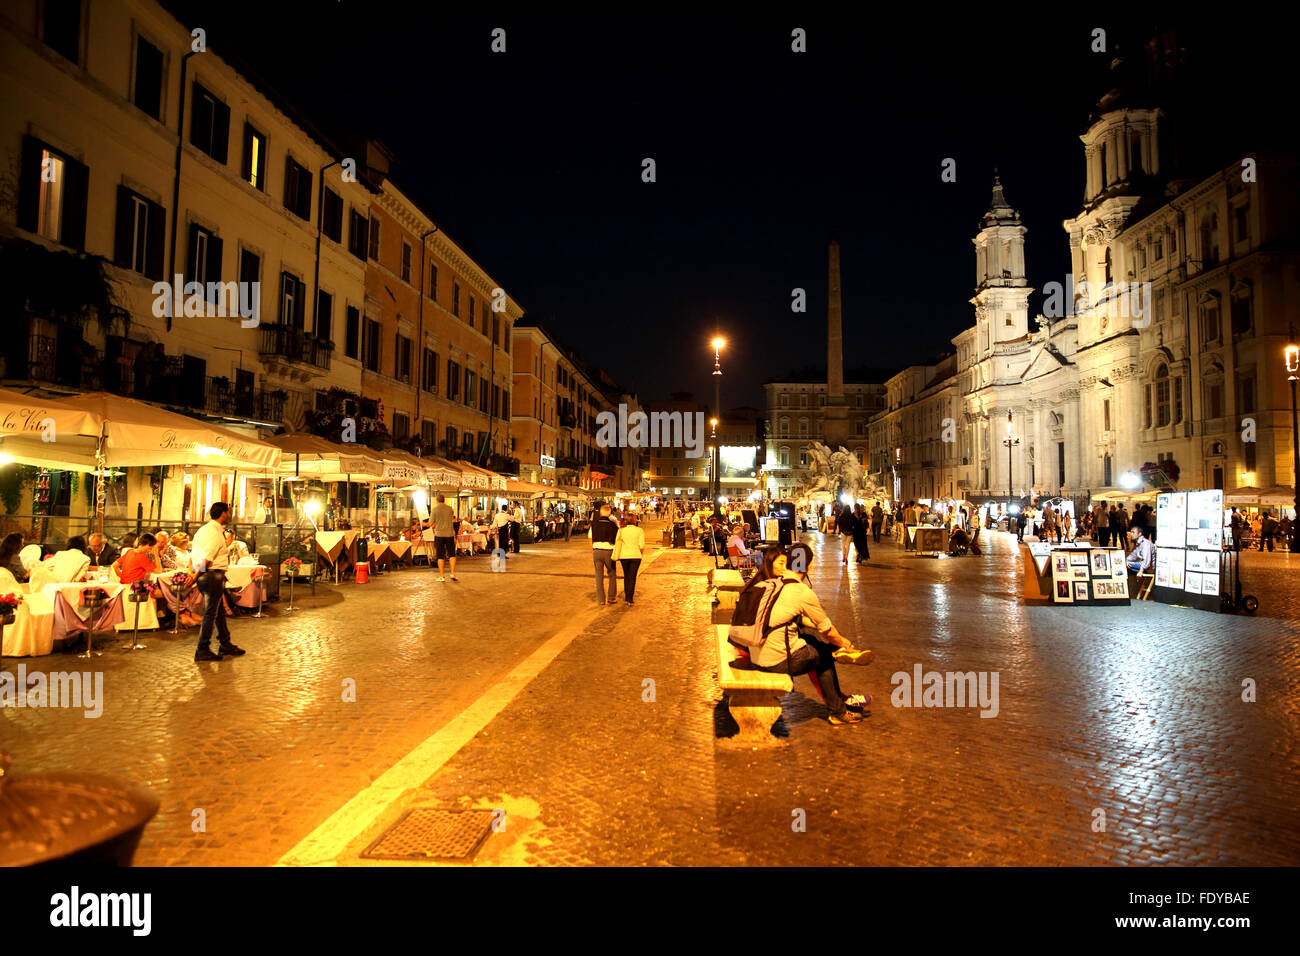 Restaurants and artists are part of the attraction of Piazza Navona in Rome at night. Stock Photo